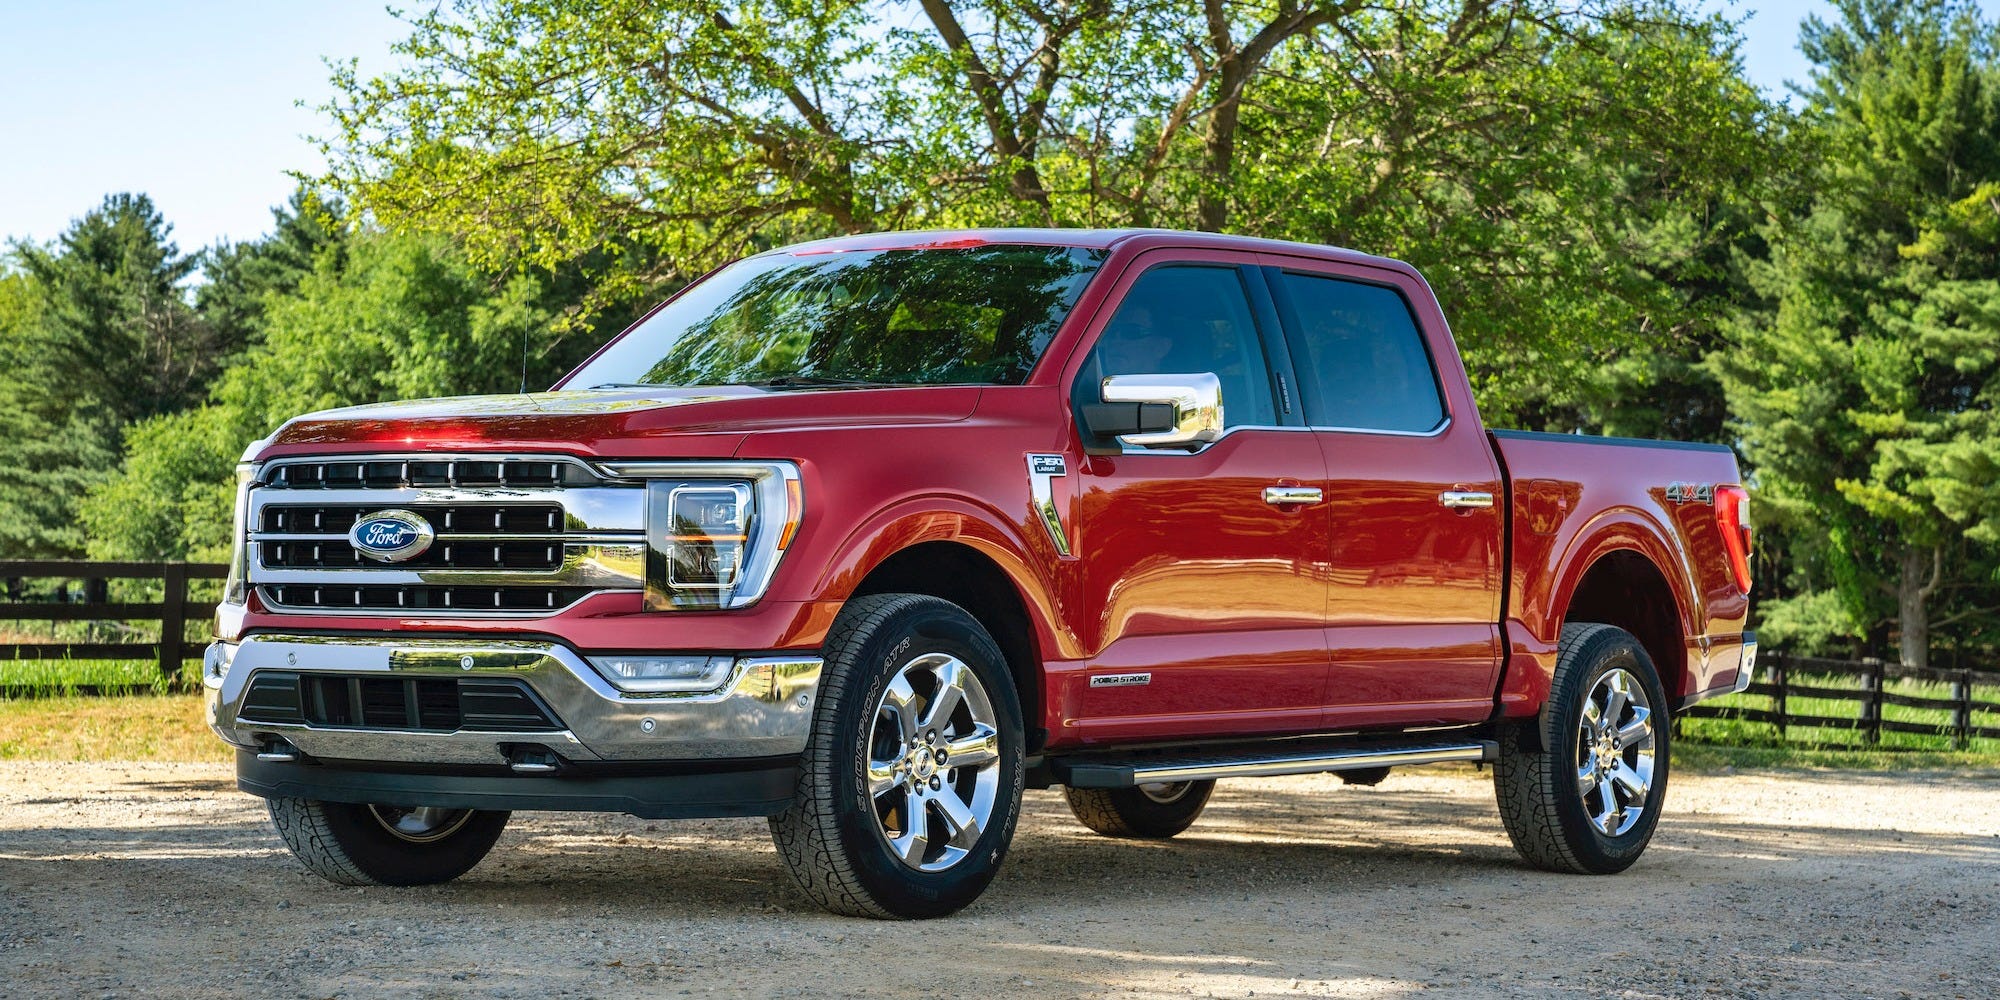 The all-new Ford F-150 was just revealed — here’s a closer look at the market-leading pickup truck (F)